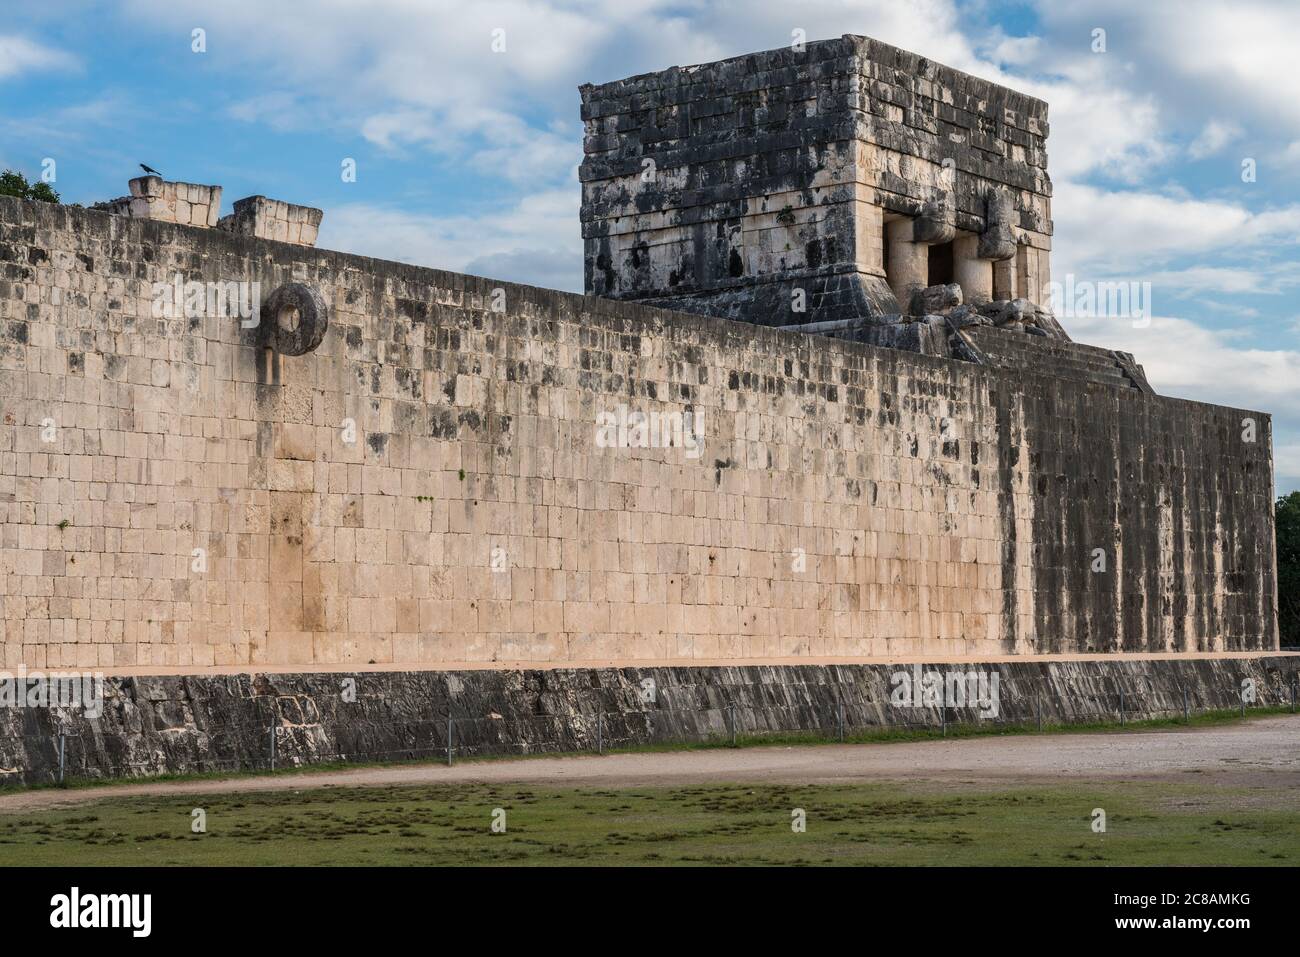 The Upper Temple of the Jaguar overlooking the Great Ball Court in the ruins of the great  Mayan city of Chichen Itza, Yucatan, Mexico.  The Pre-Hispa Stock Photo